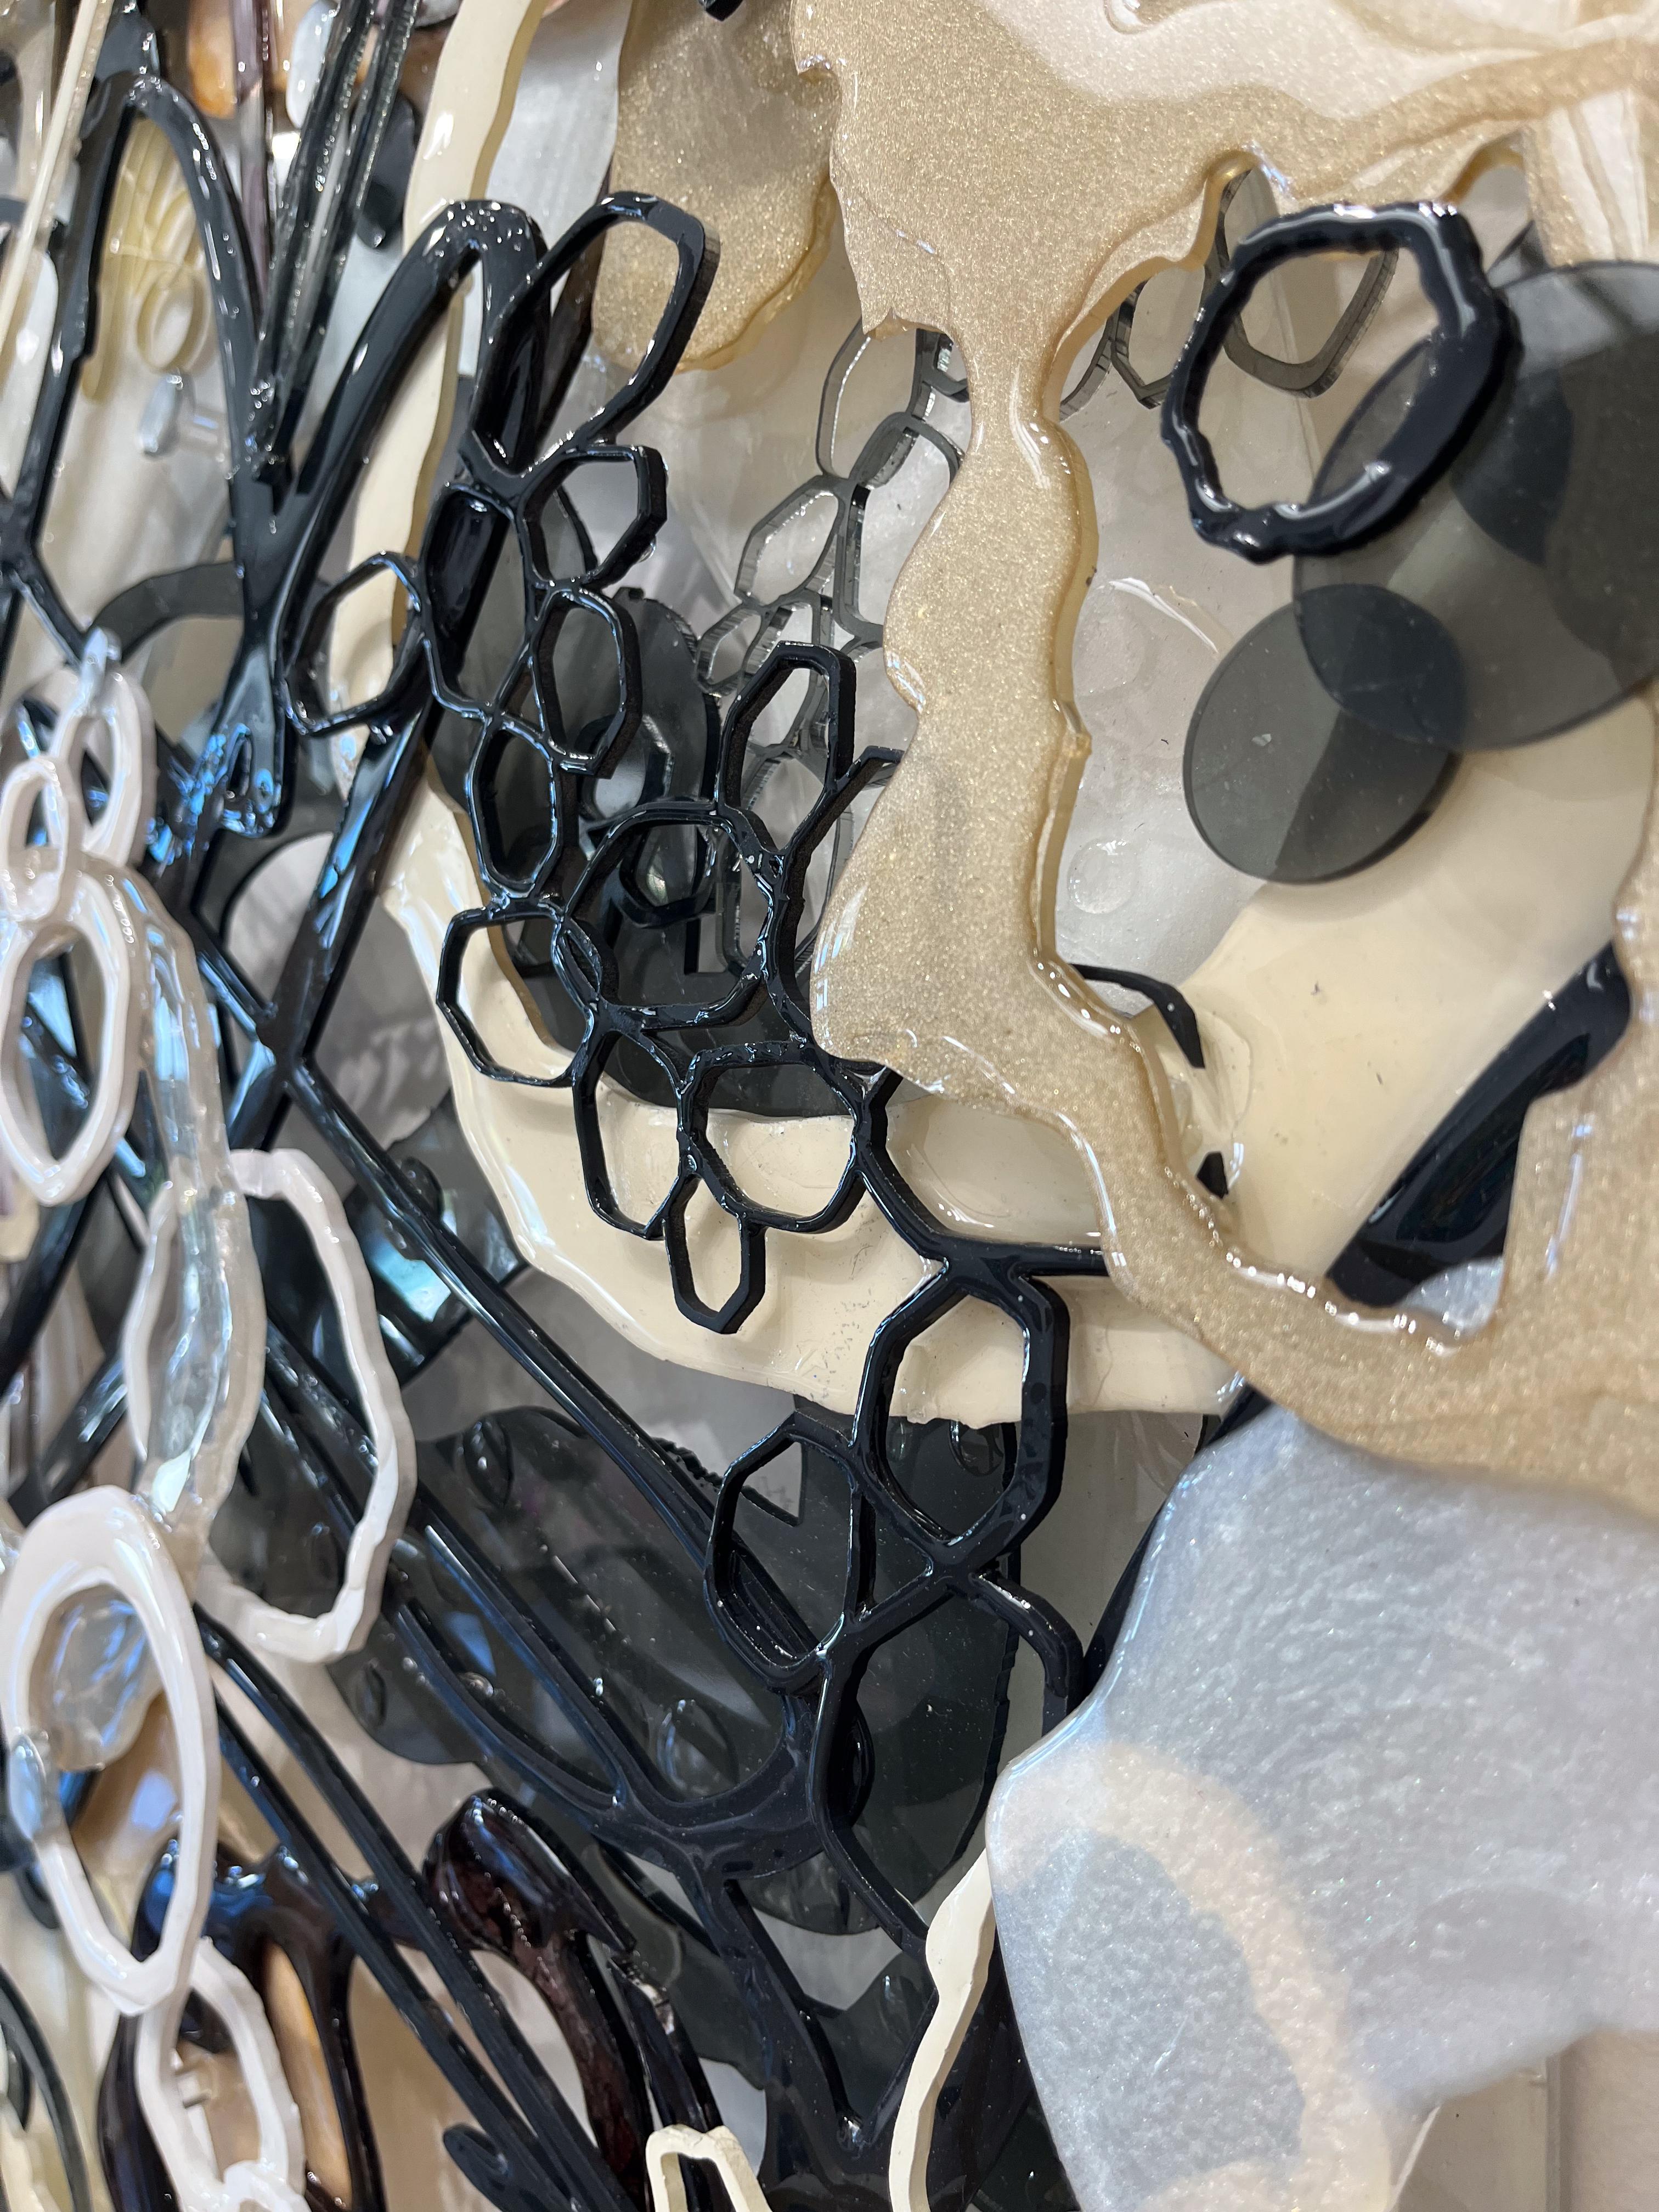 ABOUT THE ARTWORK

An opulent mixed-media marvel, woven from the intricate interplay of acrylic, ink, epoxy, and laser-cut plexiglass. Overlapping forms gracefully traverse the composition in sophisticated neutral tones encompassing grays, beige,